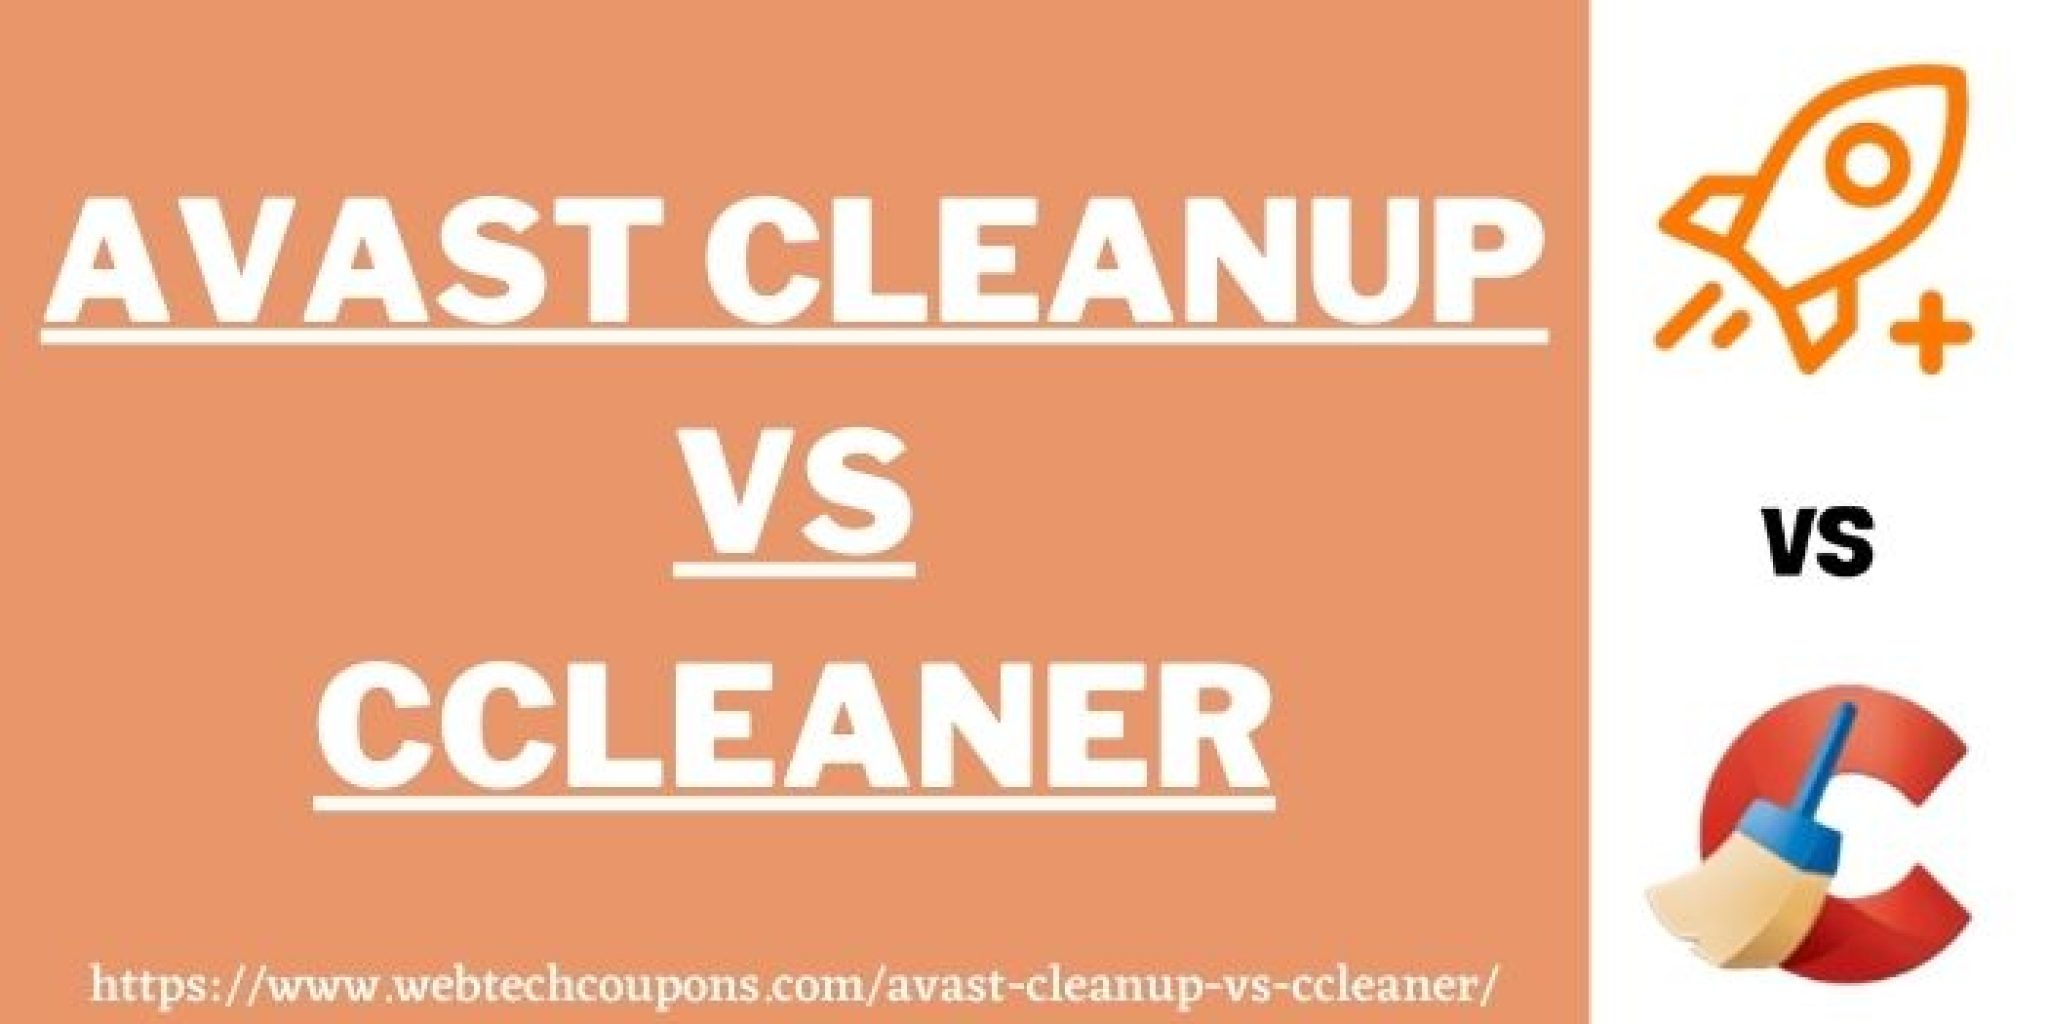 ccleaner pro or avast cleanup